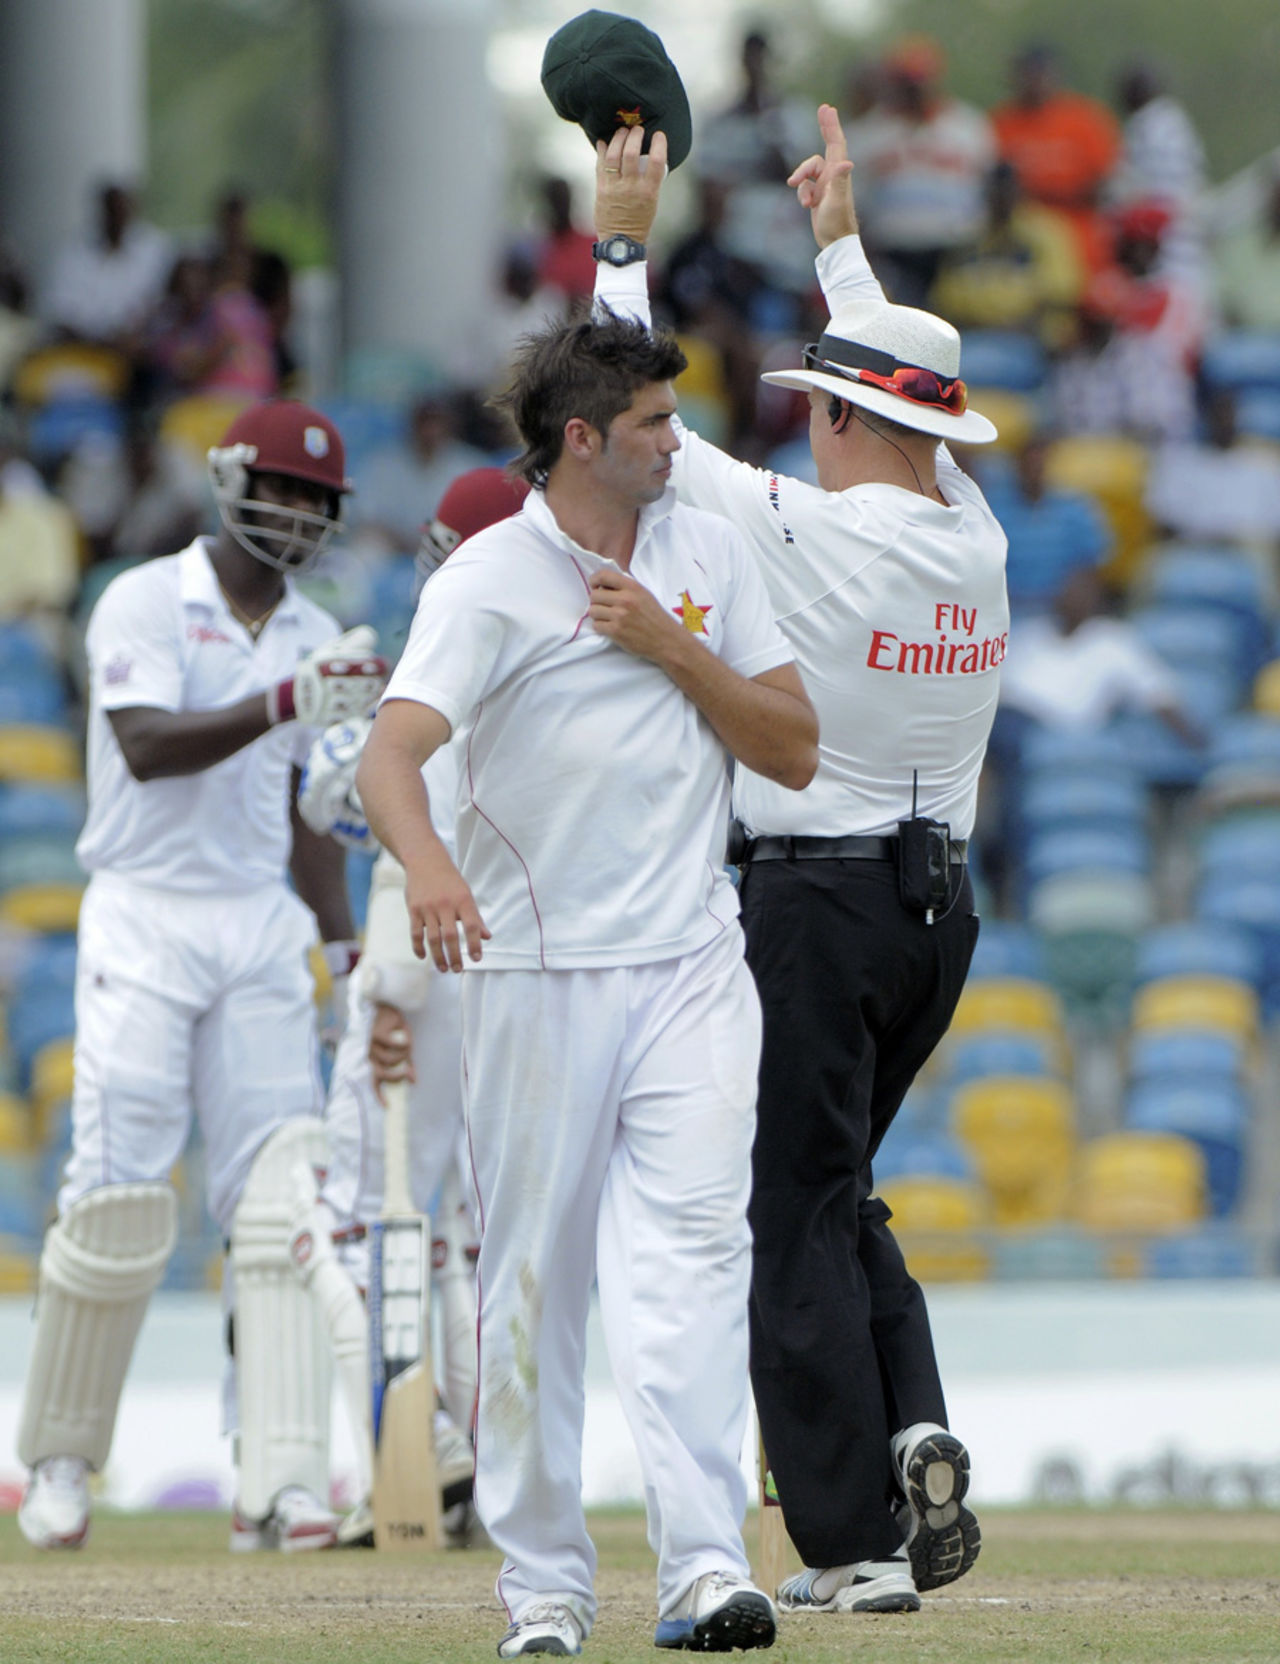 Graeme Cremer went for 103 from 20 overs, West Indies v Zimbabwe, 1st Test, Barbados, 2nd day, March 13, 2013